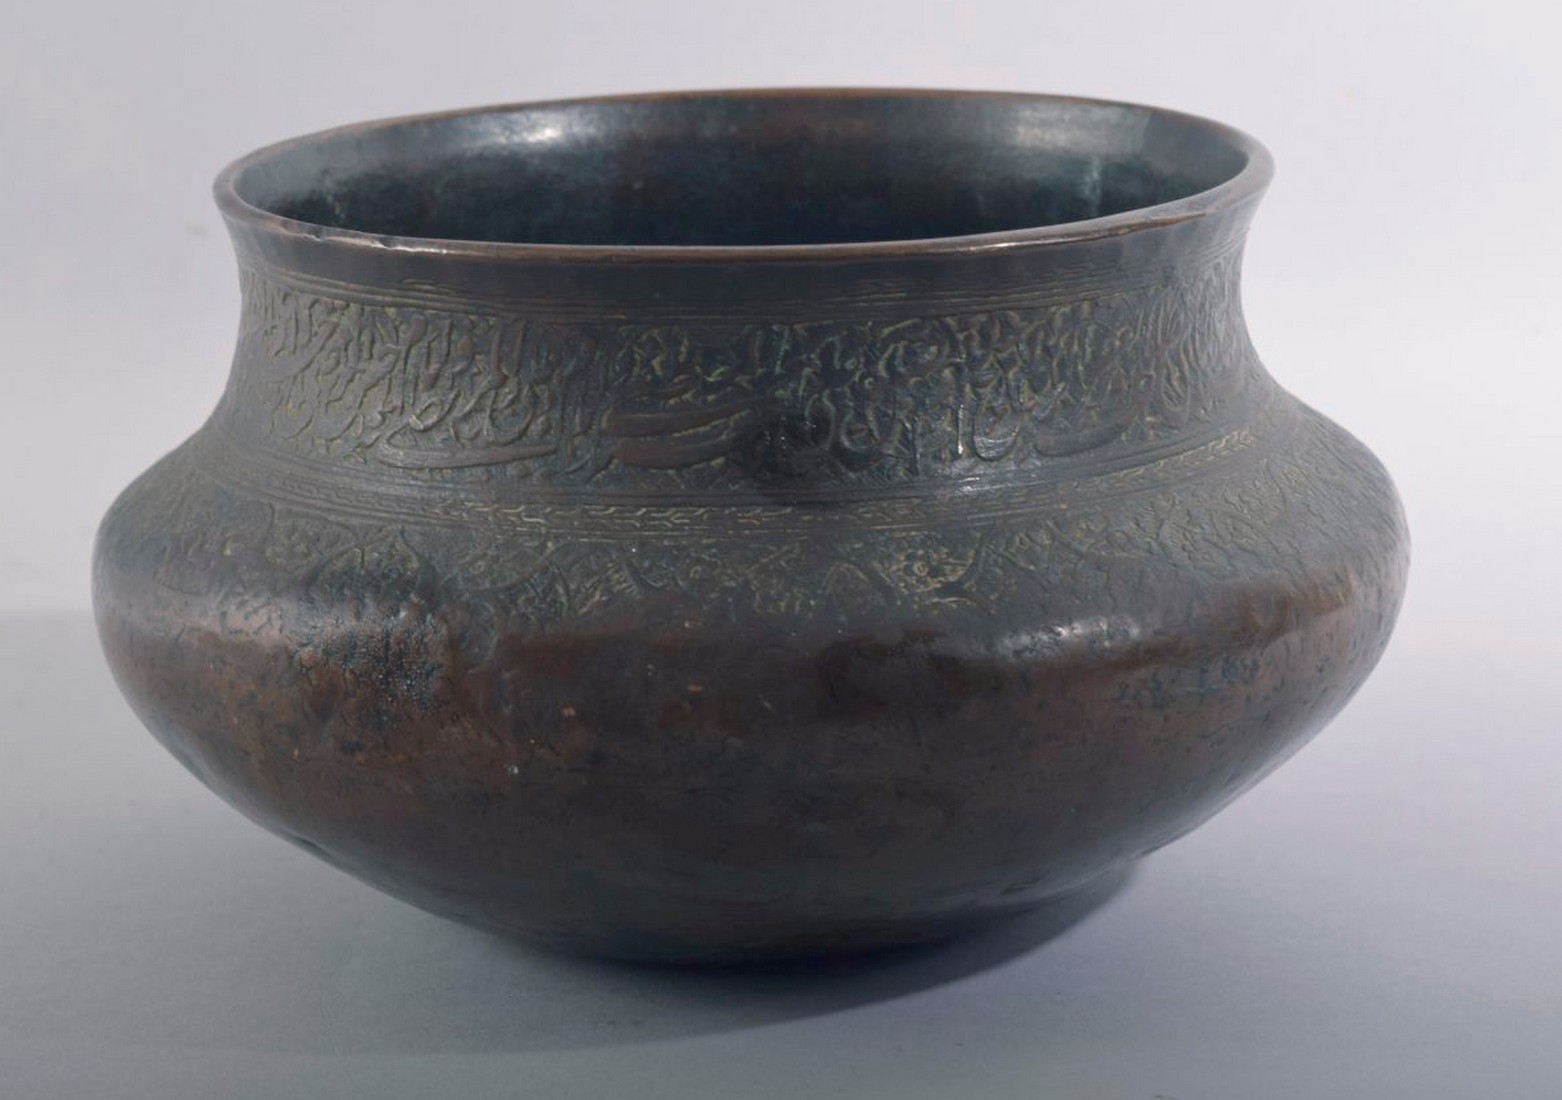 A GOOD ISLAMIC QAJAR ENGRAVED AND CHASED BRONZE BOWL, the rim engraved with a band of calligraphy - Image 3 of 6